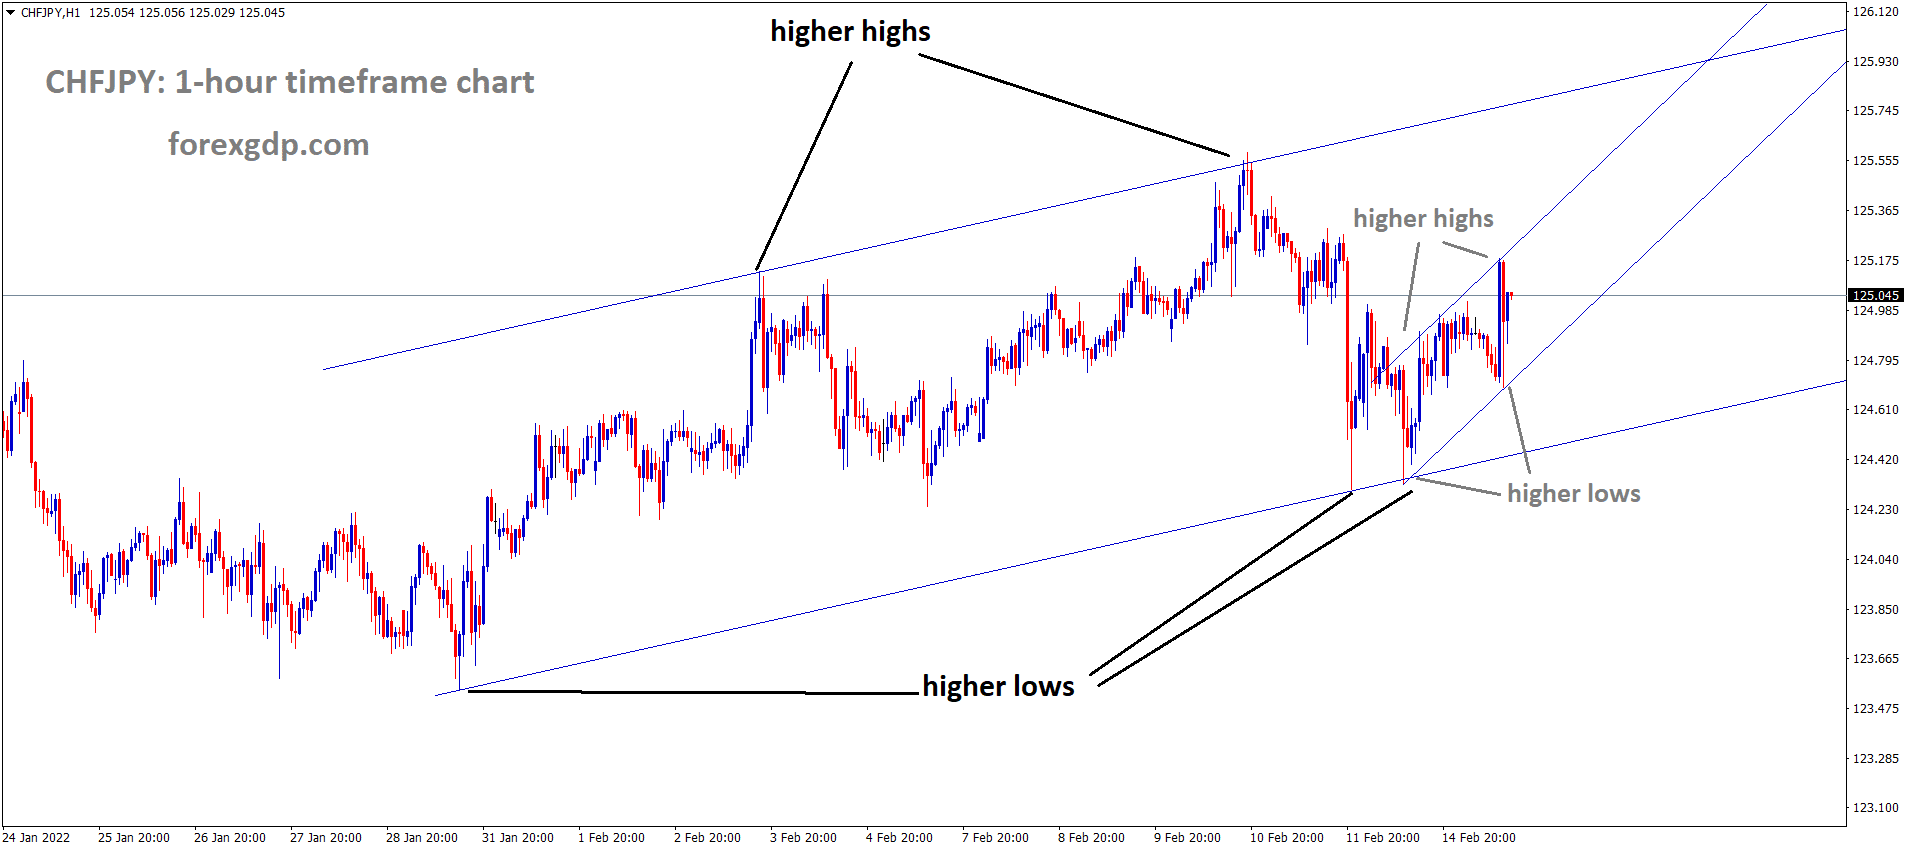 CHFJPY is moving in an Ascending channel and the market has rebounded from the higher low